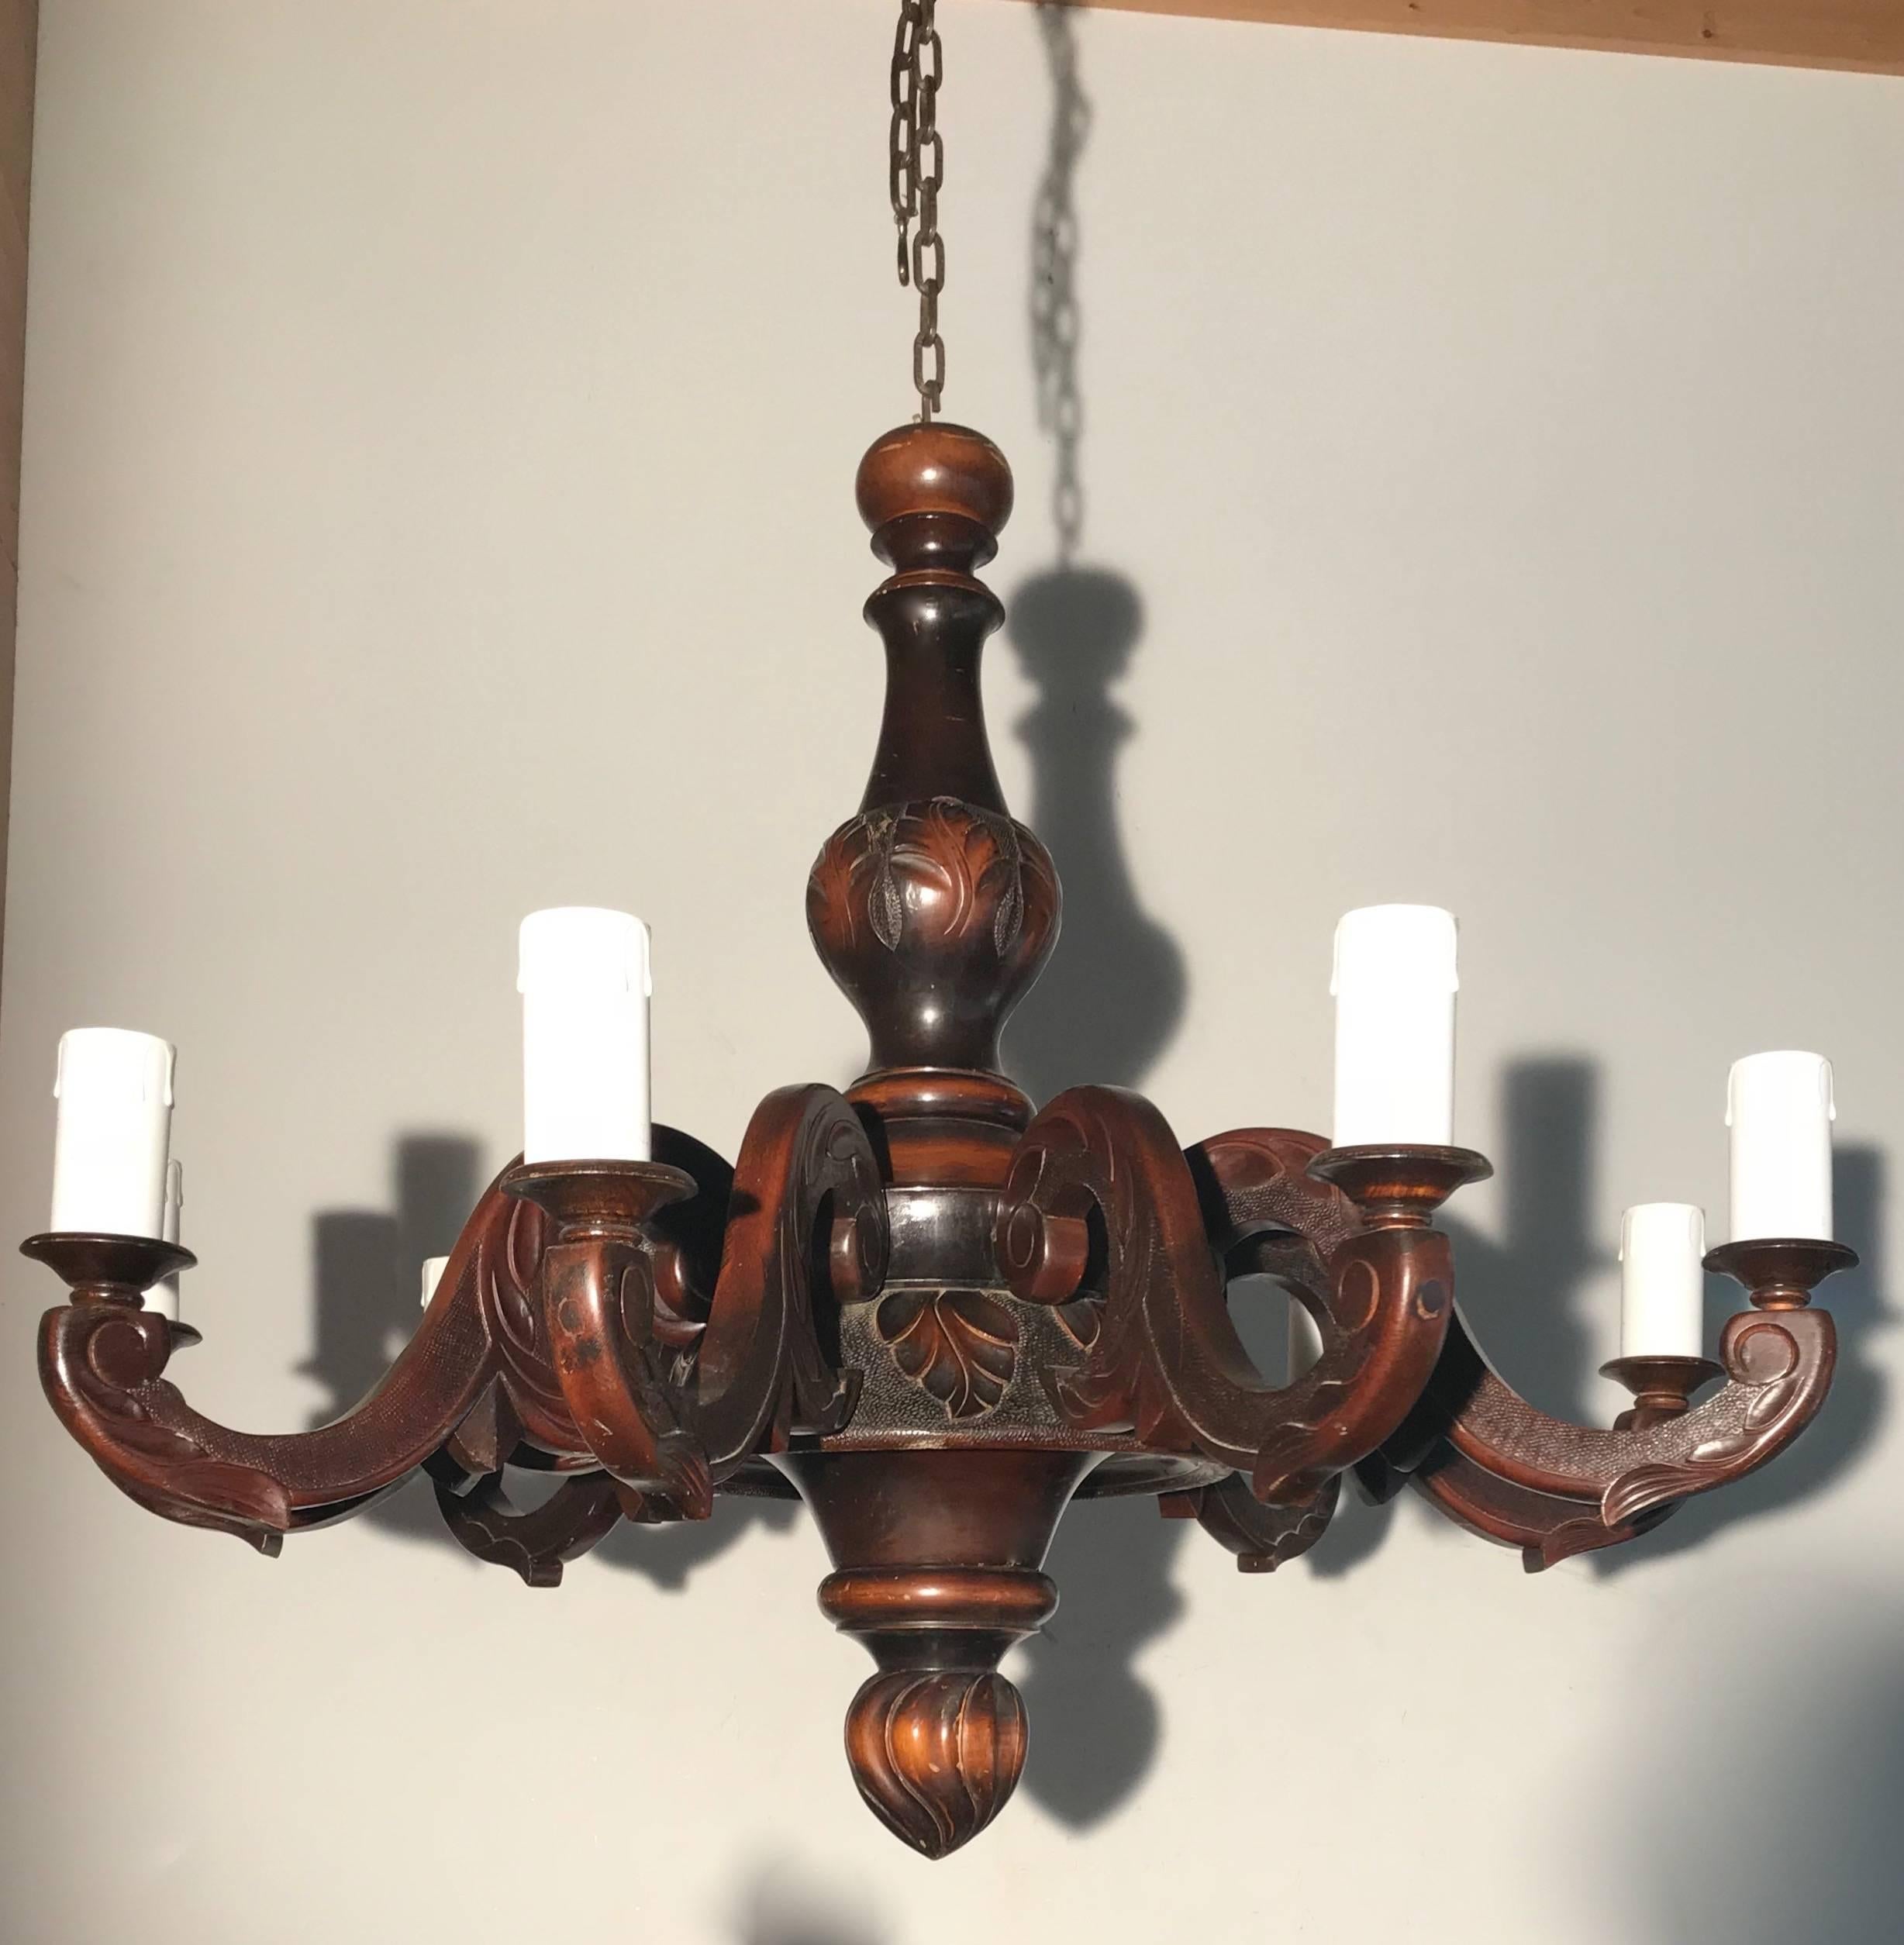 Large & Handcrafted Wooden Nine-Arm Dining Room Chandelier with a Great Patina 2